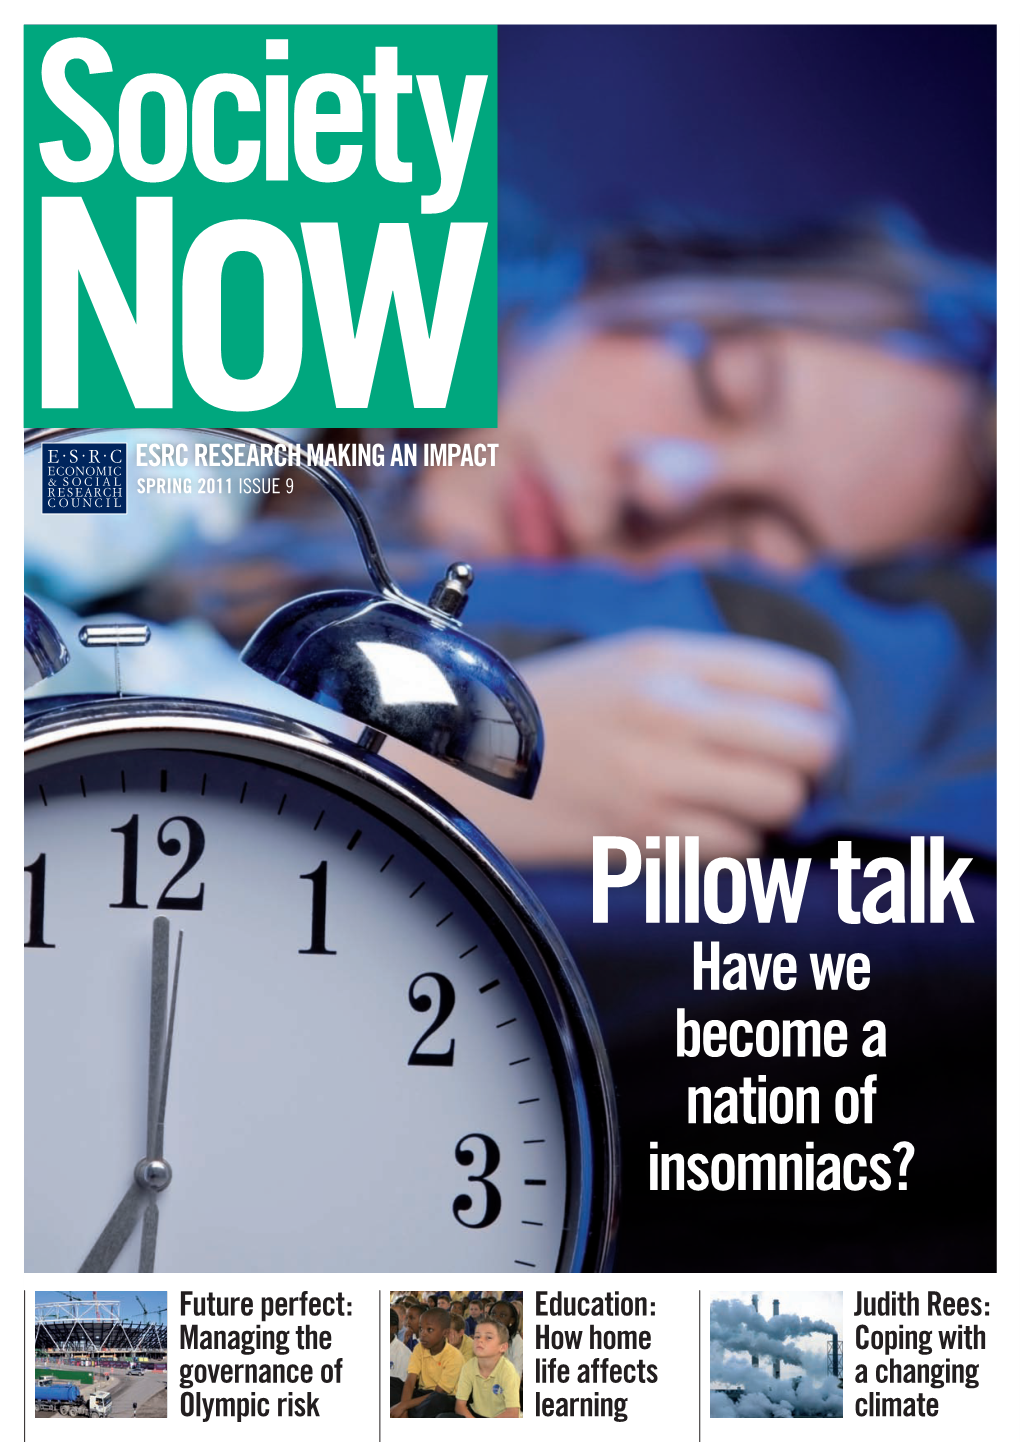 Have We Become a Nation of Insomniacs?